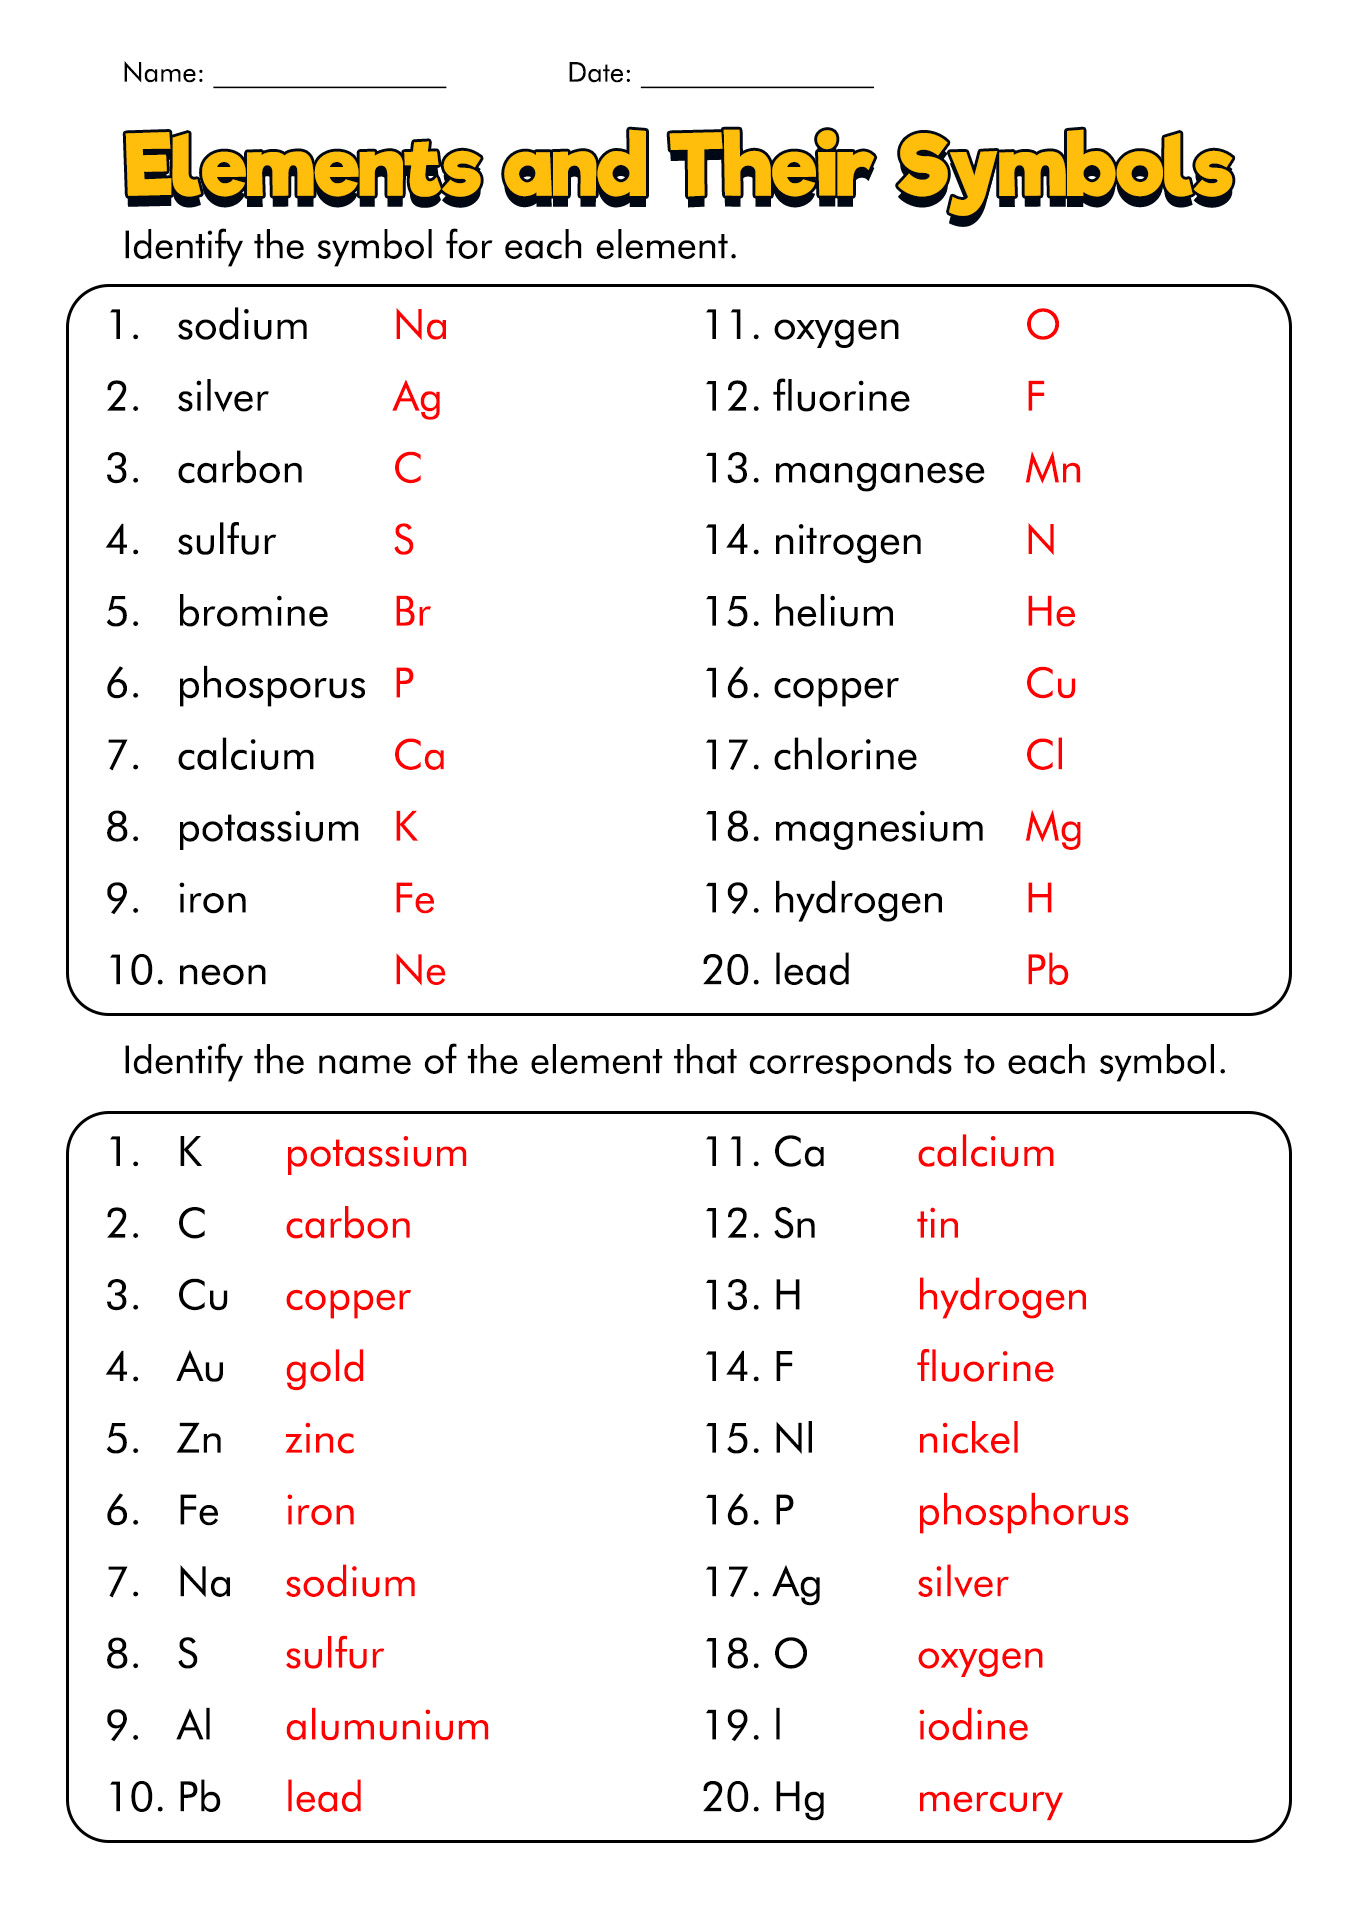 Periodic Table Worksheet Answers Image